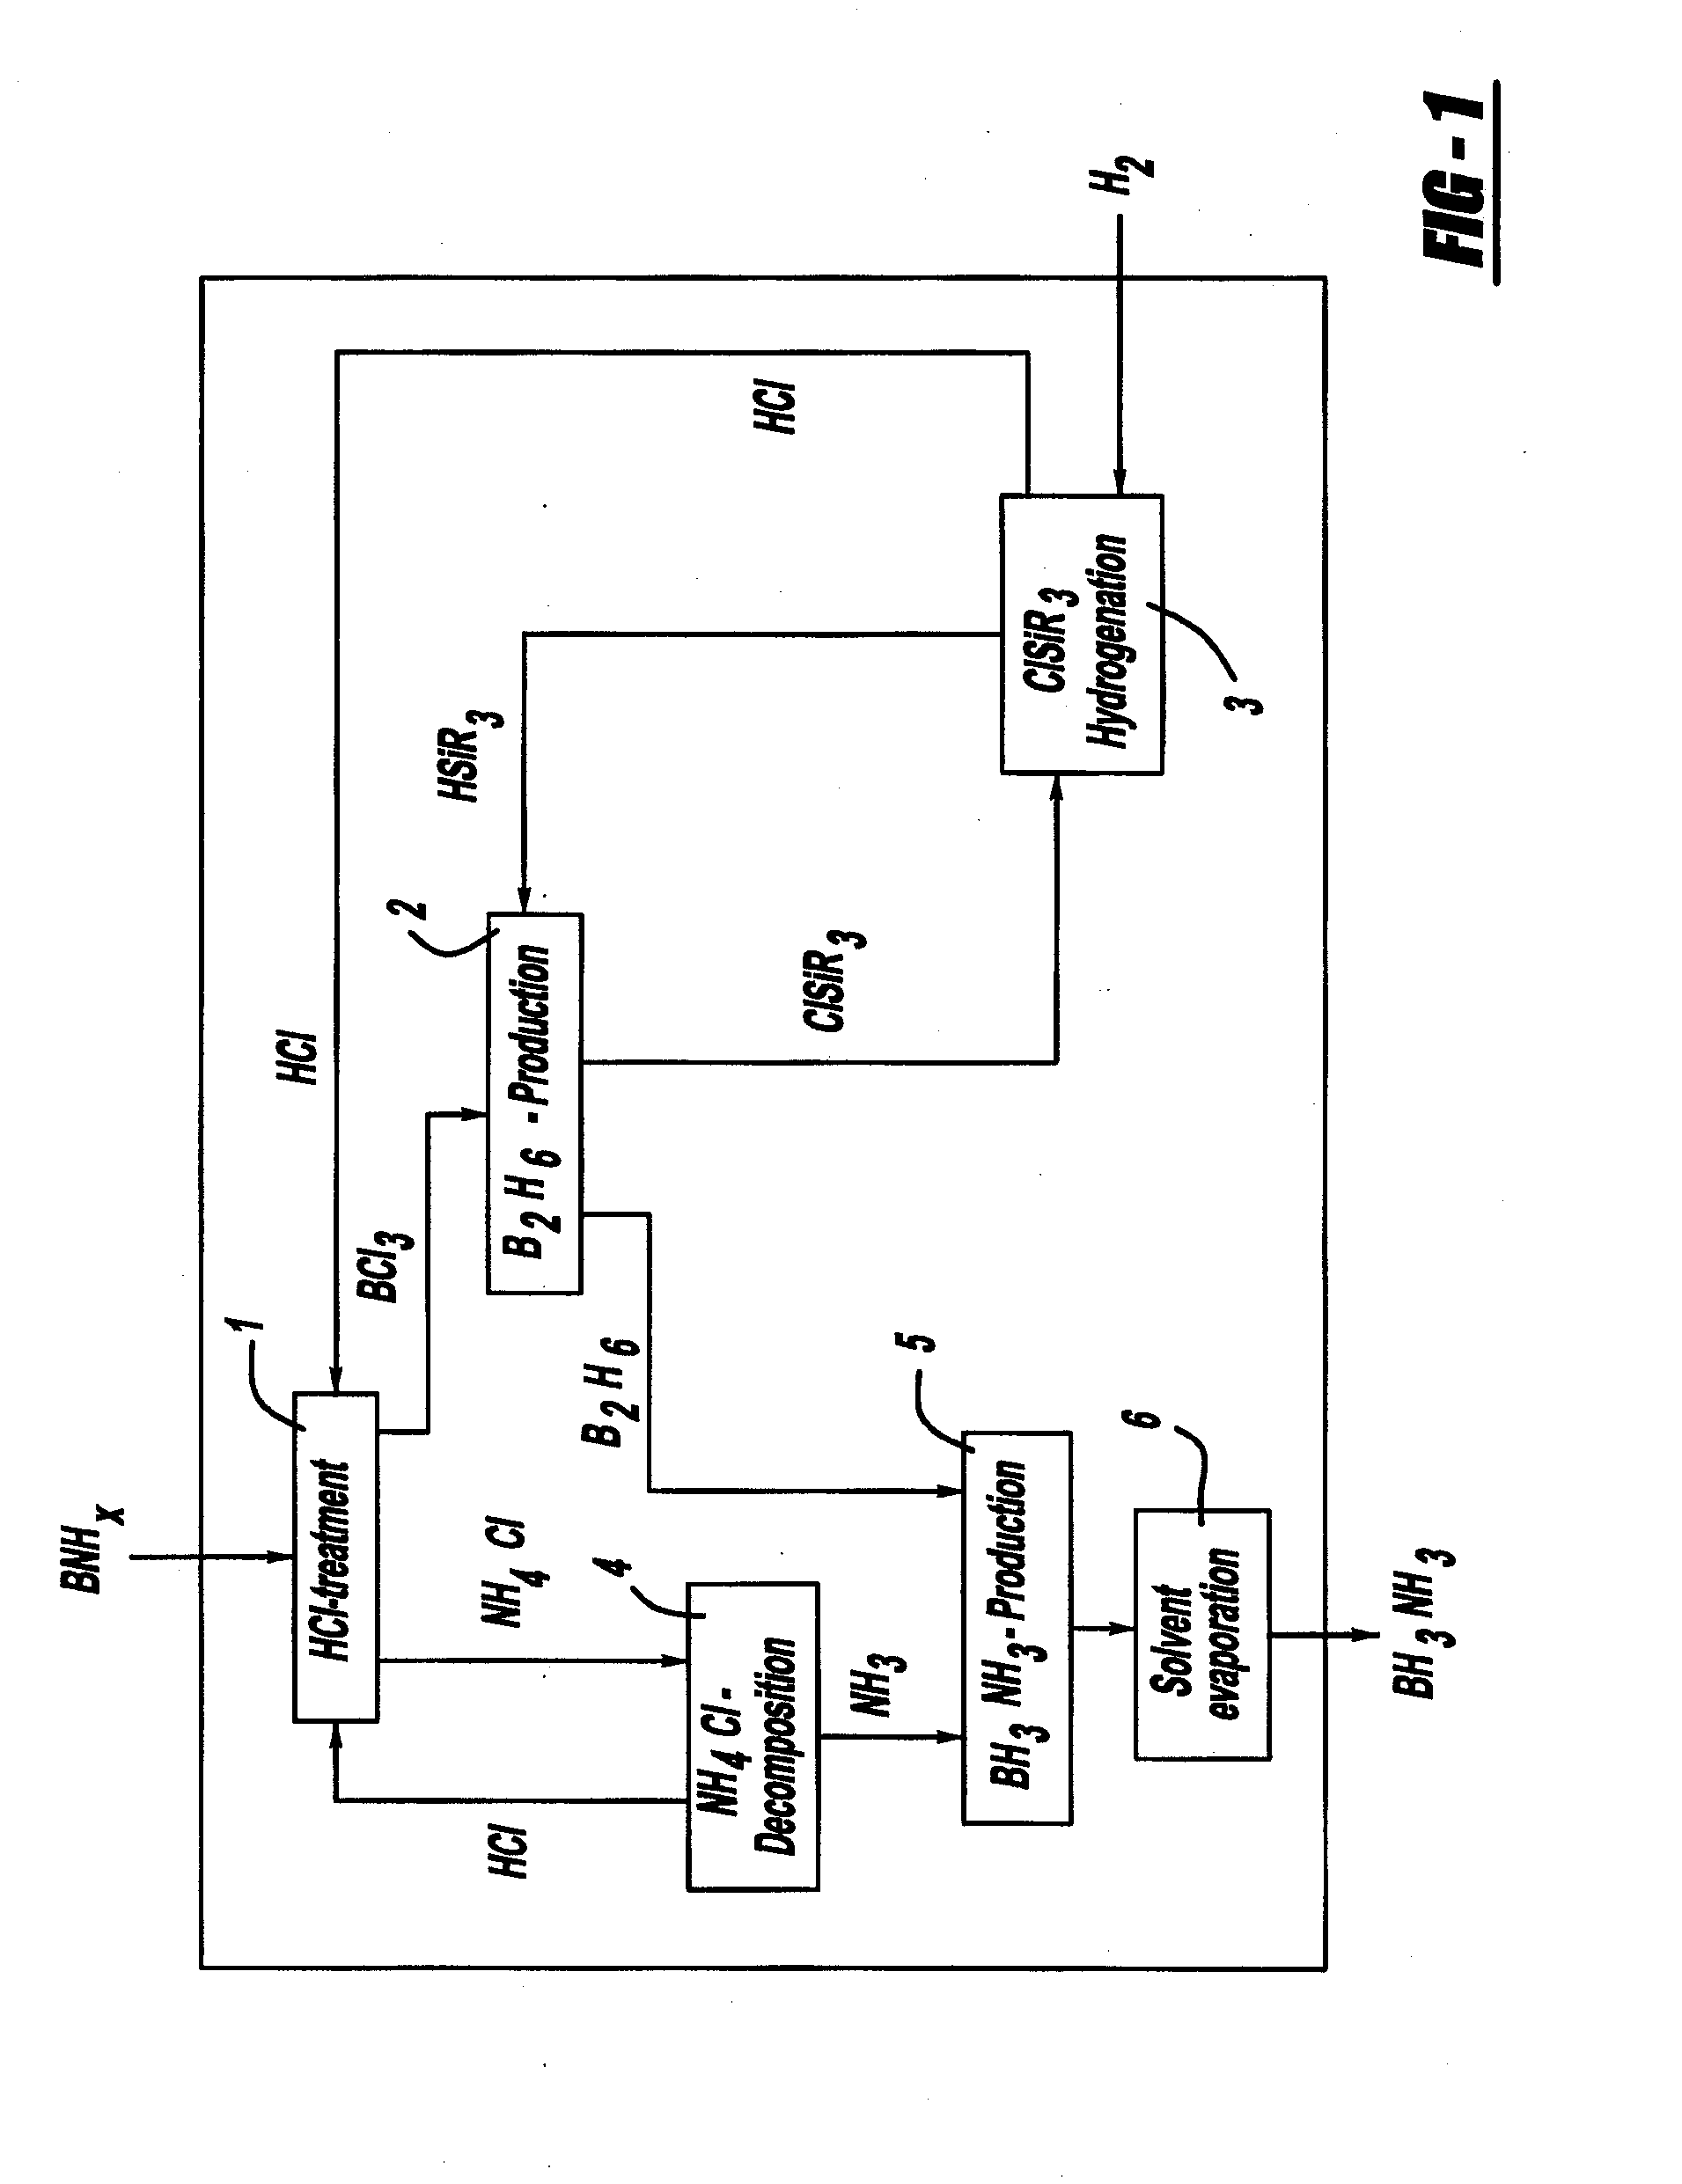 Procedure for the hydrogenation of bnh-containing compounds